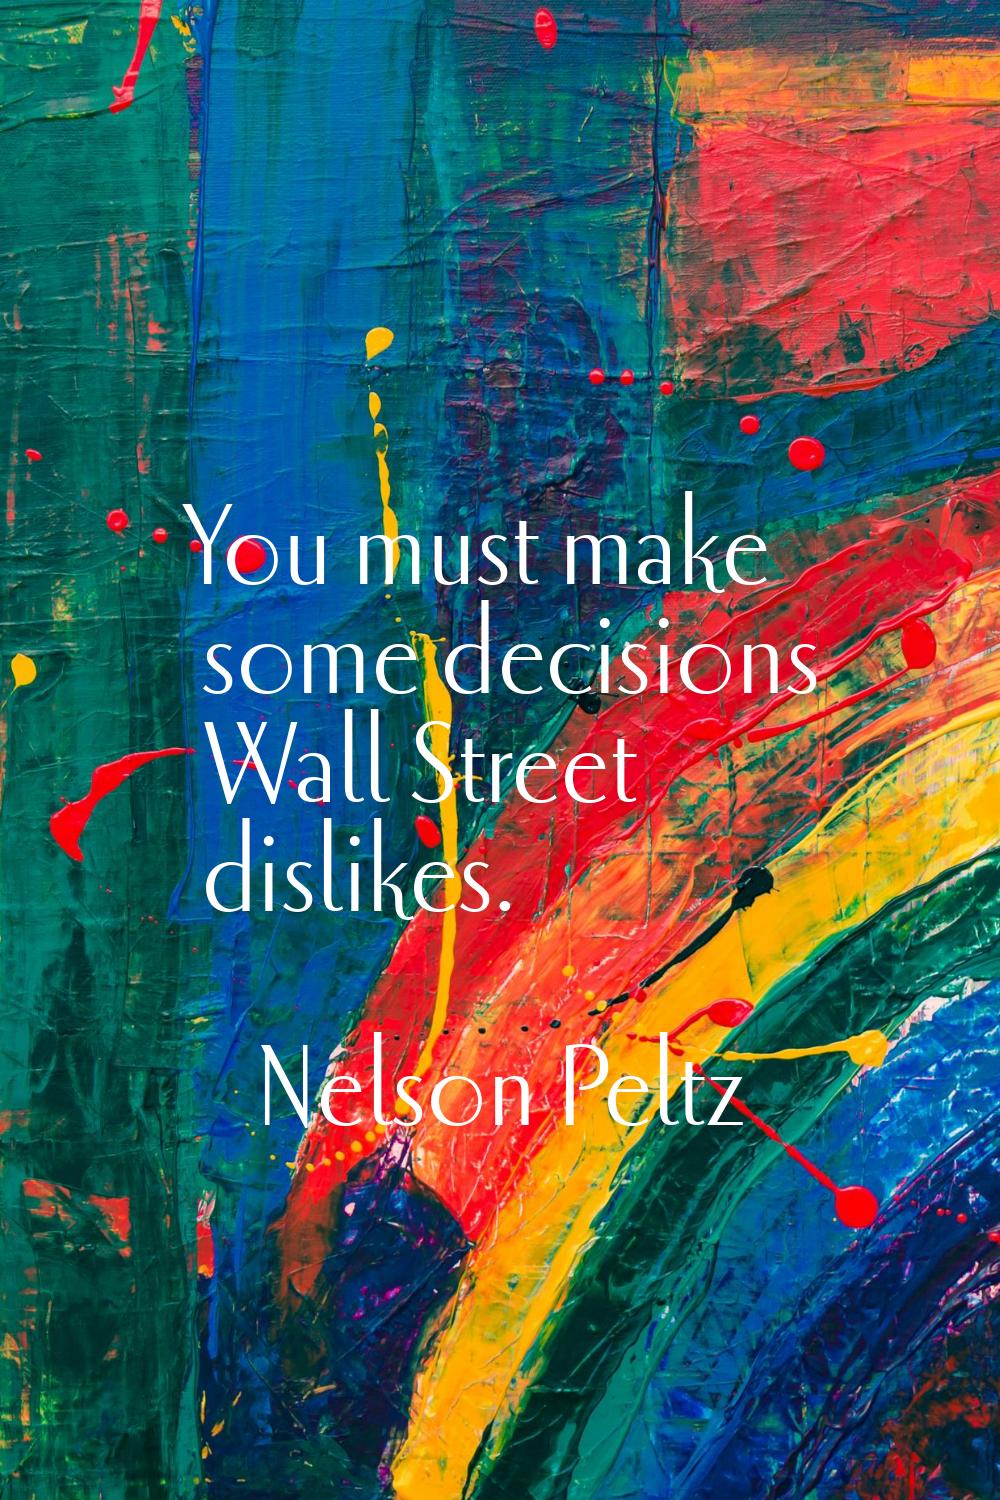 You must make some decisions Wall Street dislikes.